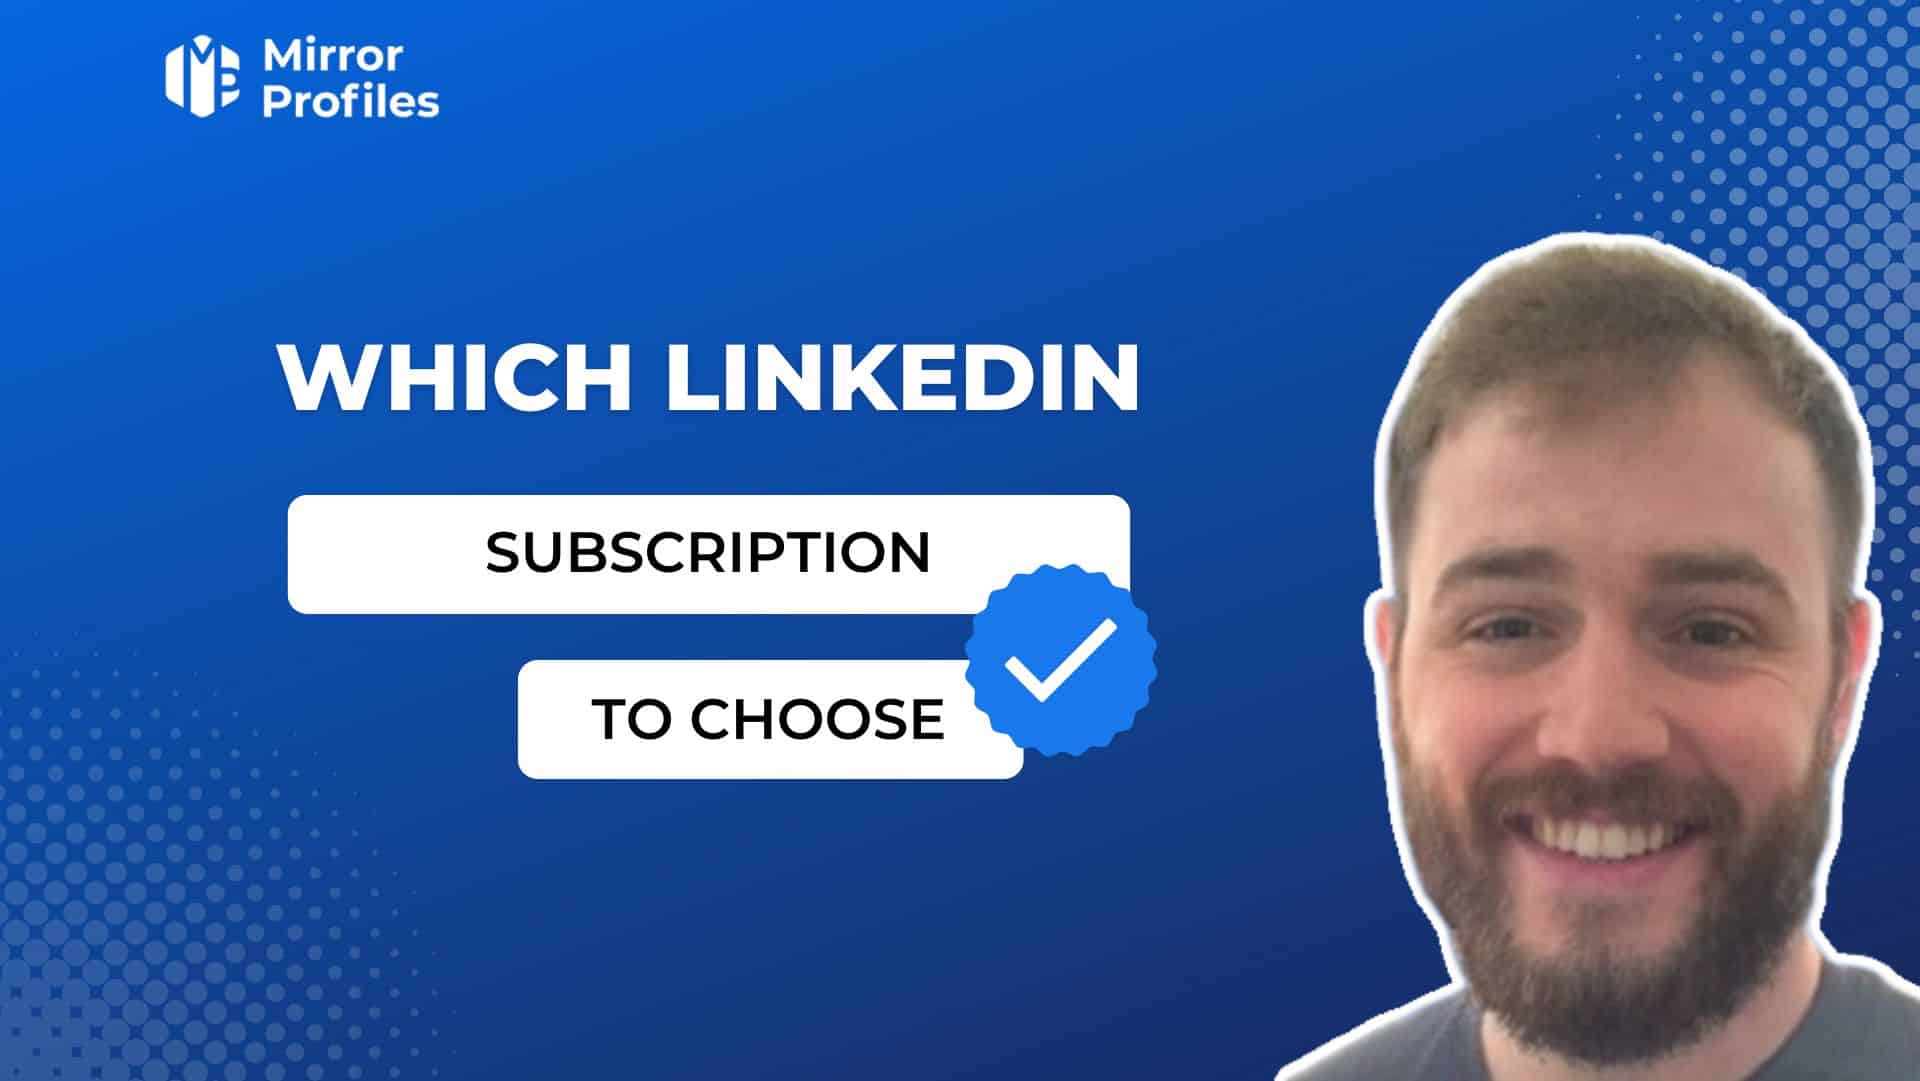 Wich LinkedIn subscription to choose?